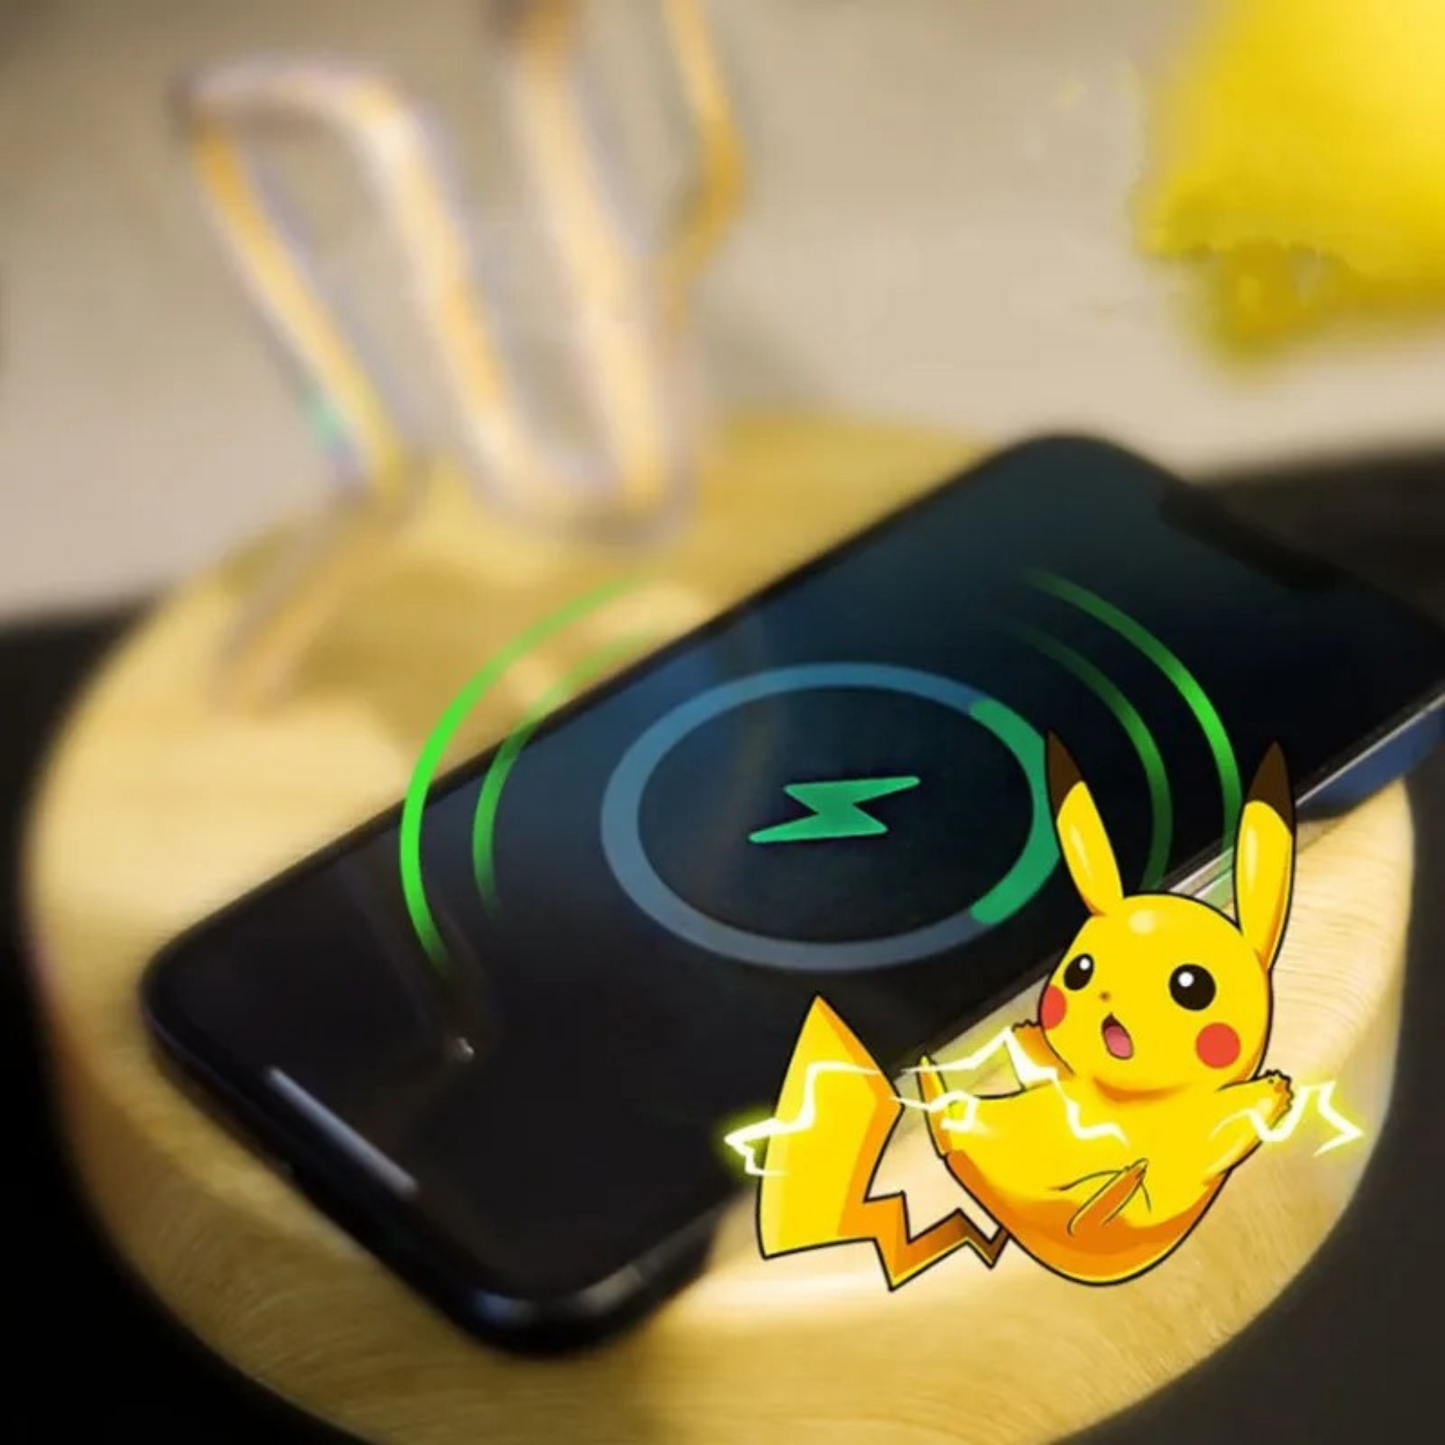 iPhone charging - Pikachu Pokemon wireless charger with thunderbolt lightning LED lights | Perfect as a night light lamp decor gift for Pokémon fans.